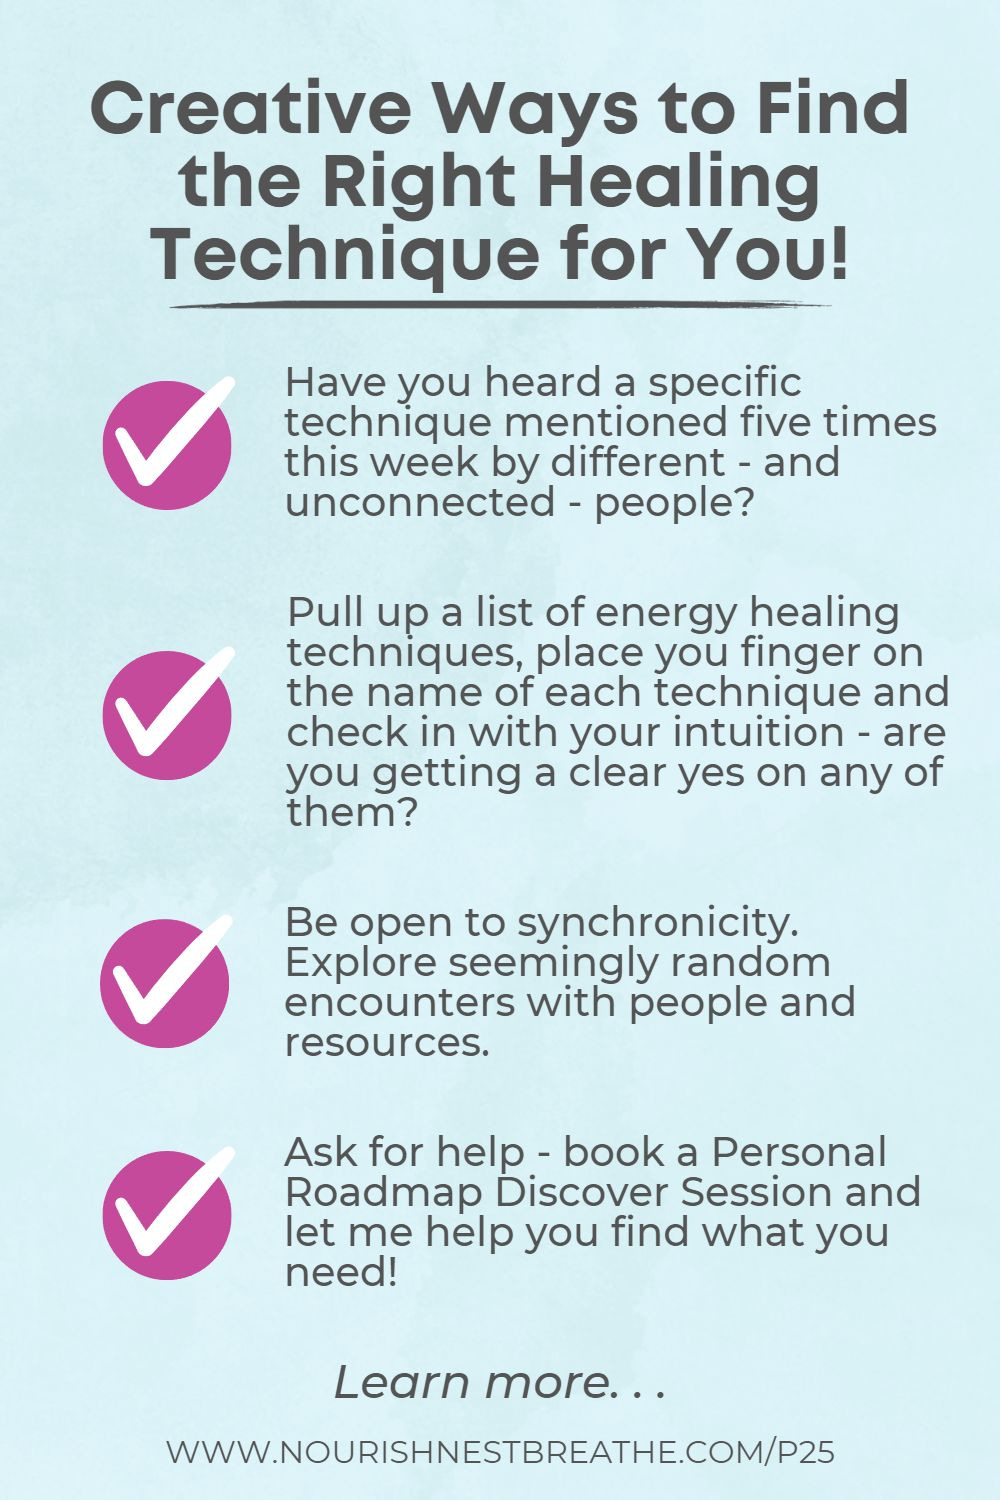 Creative ways to find the right healing technique for you to help in expressing your authentic voice.